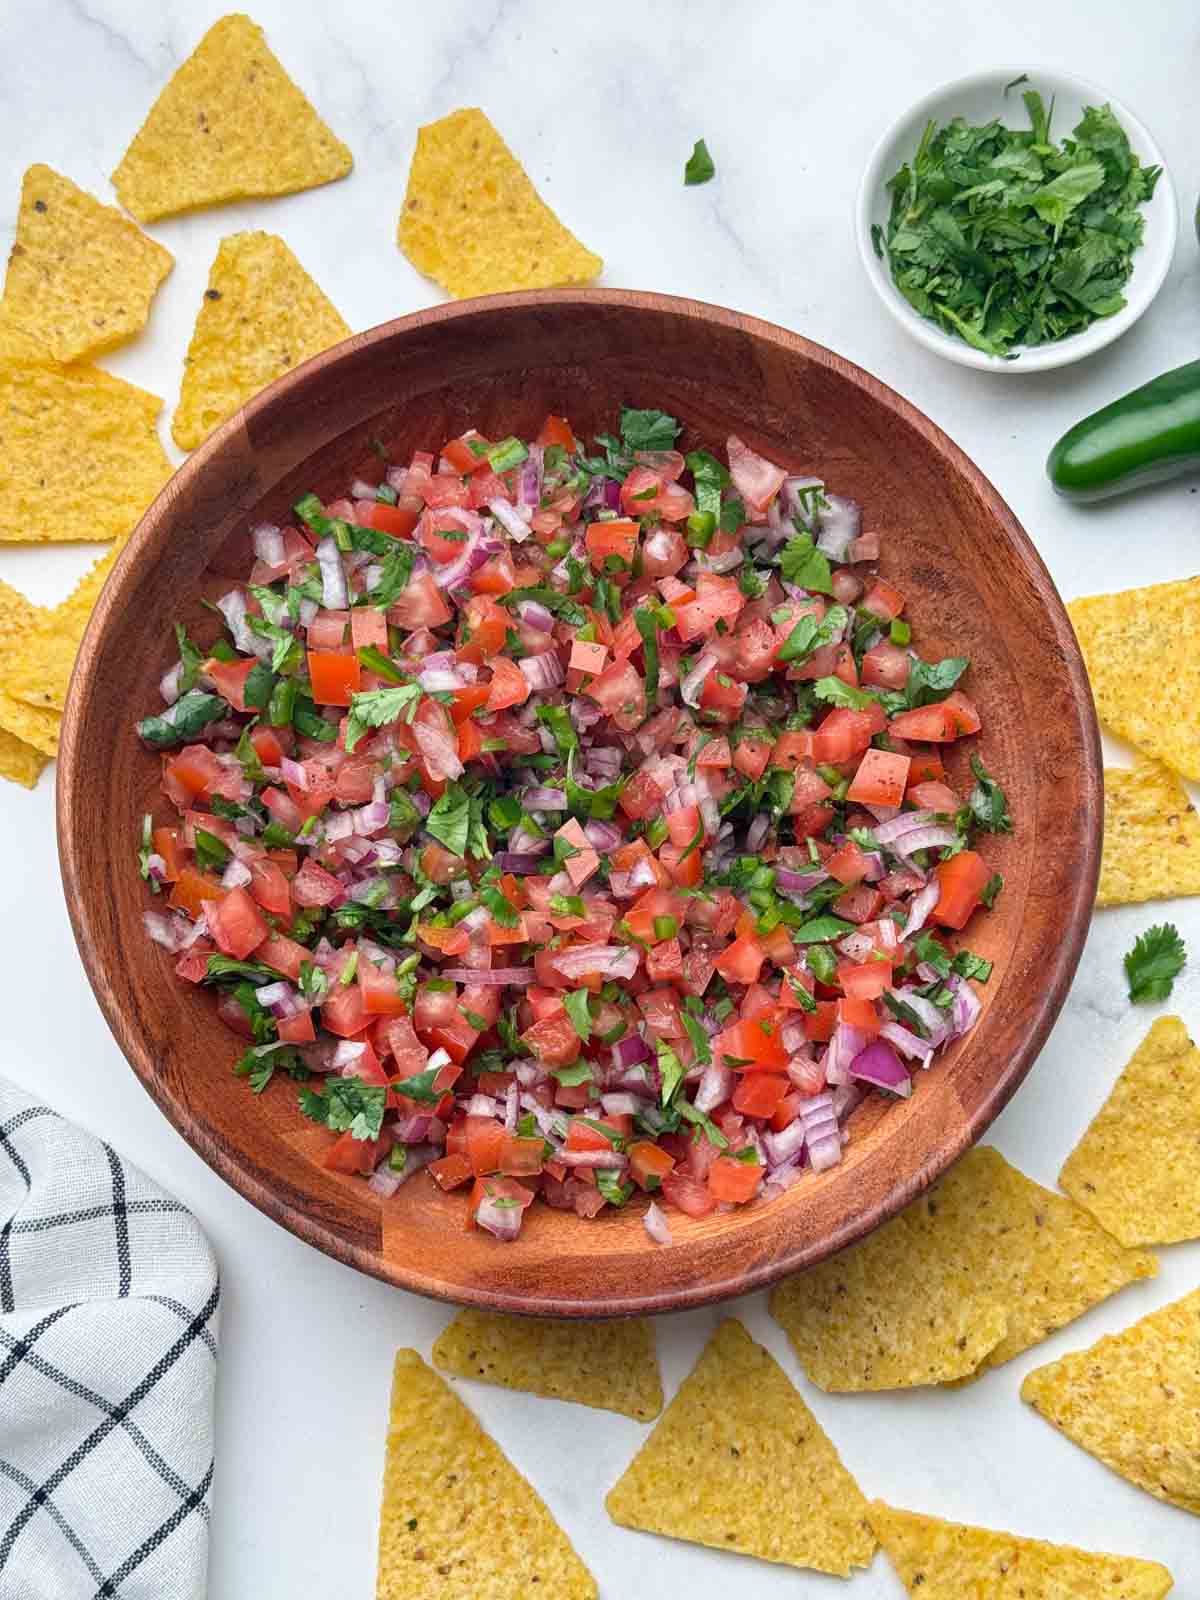 pico de gallo served in a wooden bowl with side of tortilla chips and coriander. 